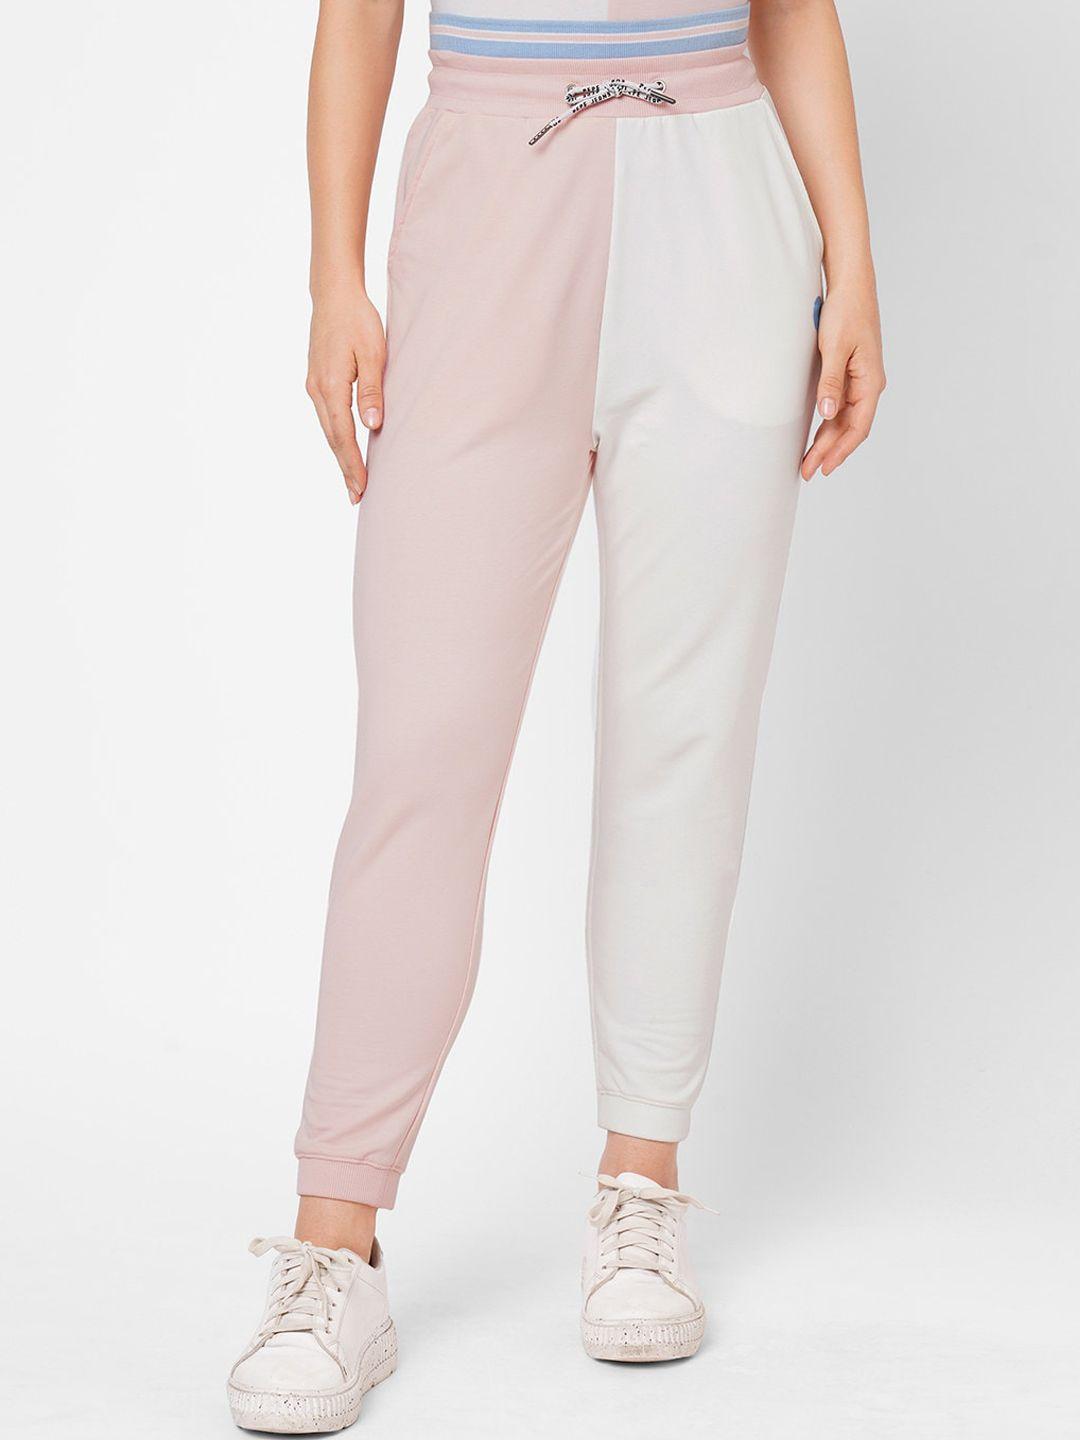 pepe jeans women pink colorblocked cotton track pants